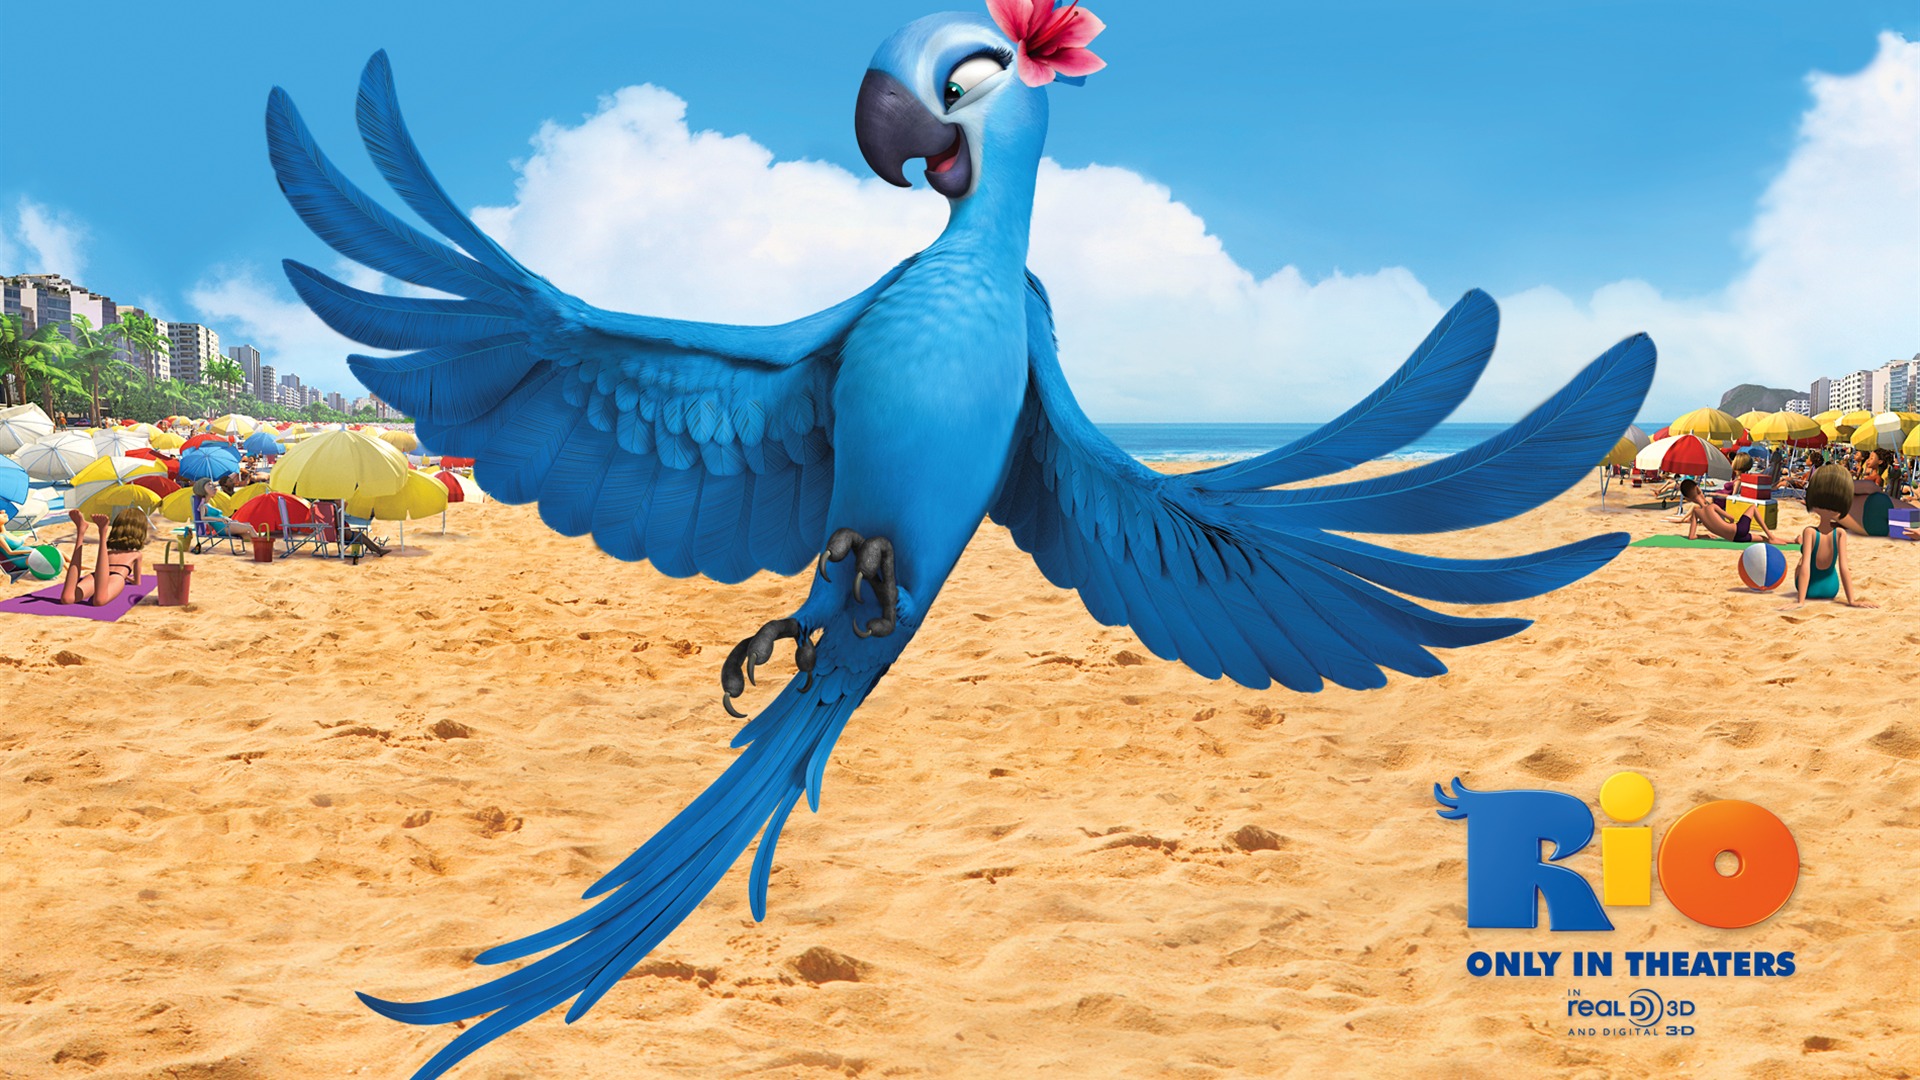 Rio 2011 wallpapers #6 - 1920x1080